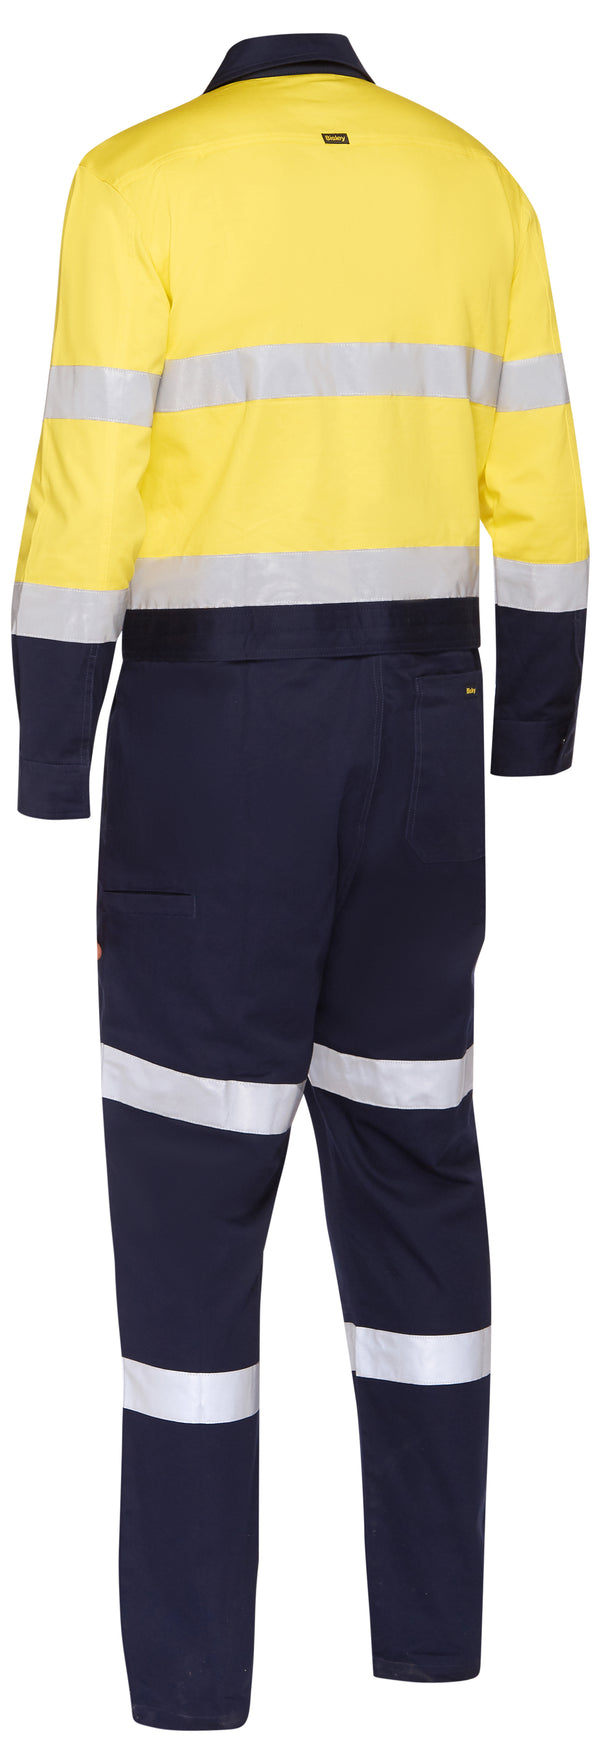 Taped Hi-Vis Work Coverall With Waist Zip Opening (Stout)